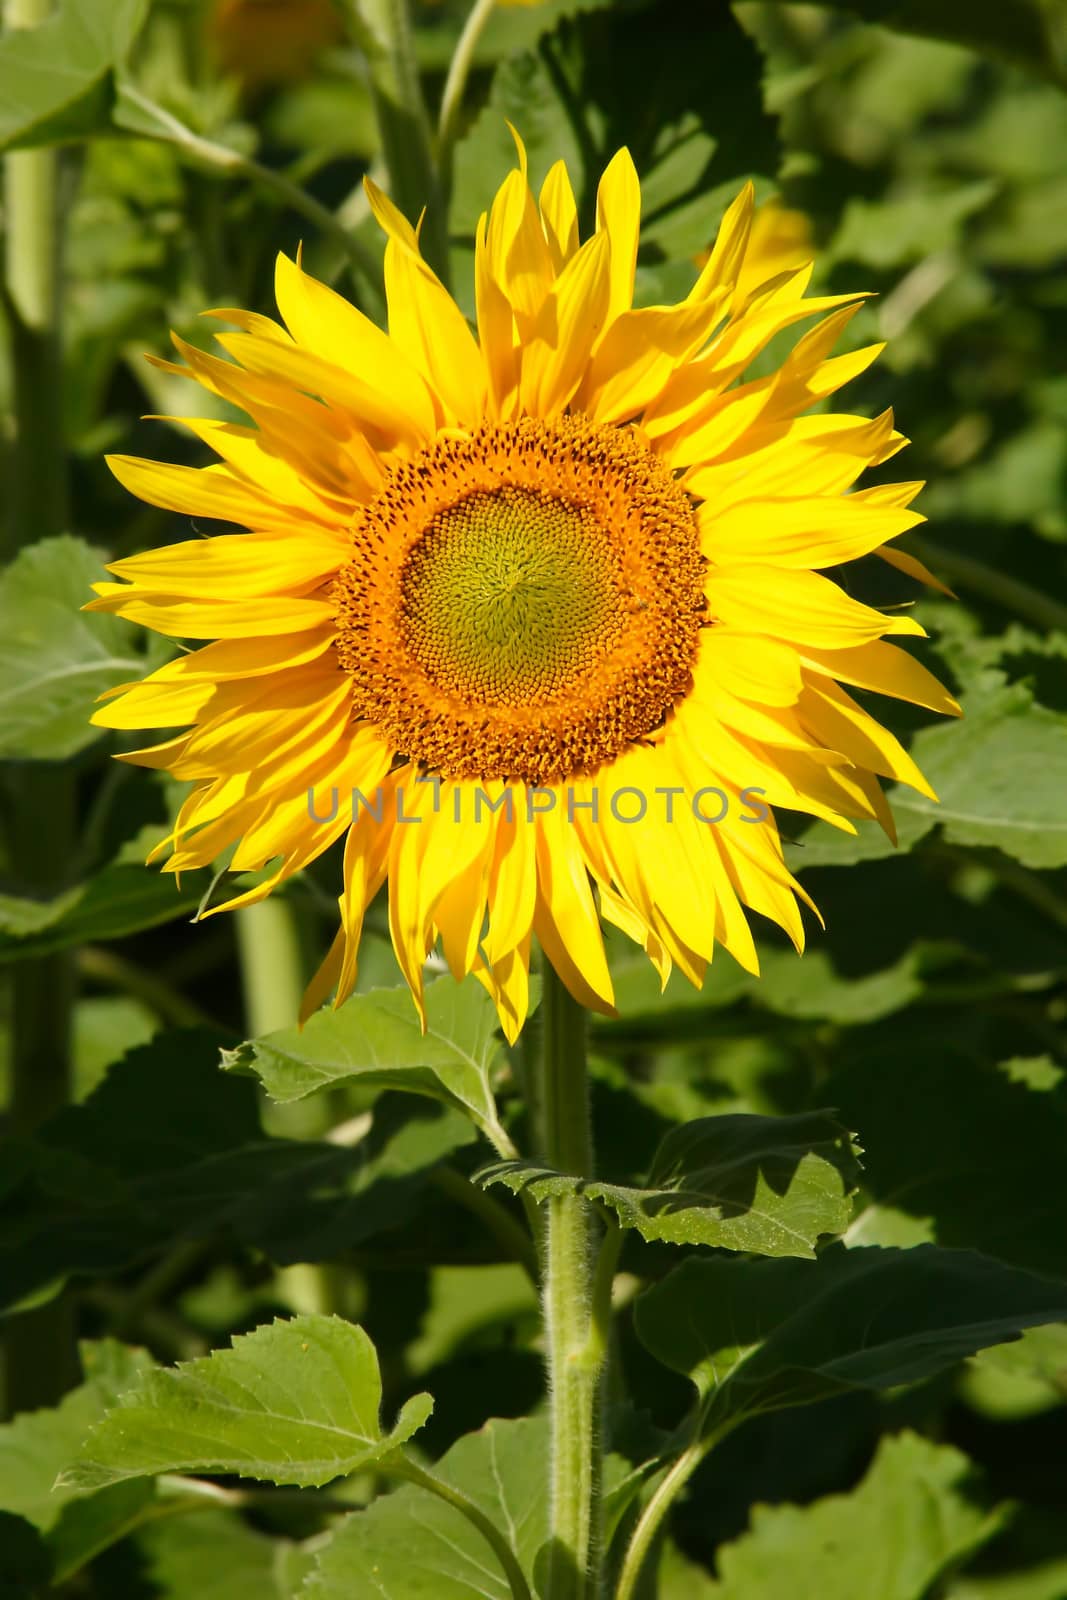 sunflowers, yellow, vibrant, sunny, sunflower, sky, scene, rural, prato, plantation, plant, panorama, overcast, outside, nature, growth, green, flower, field, farm, earth, culture, country, clear, bright, blue, agriculture,